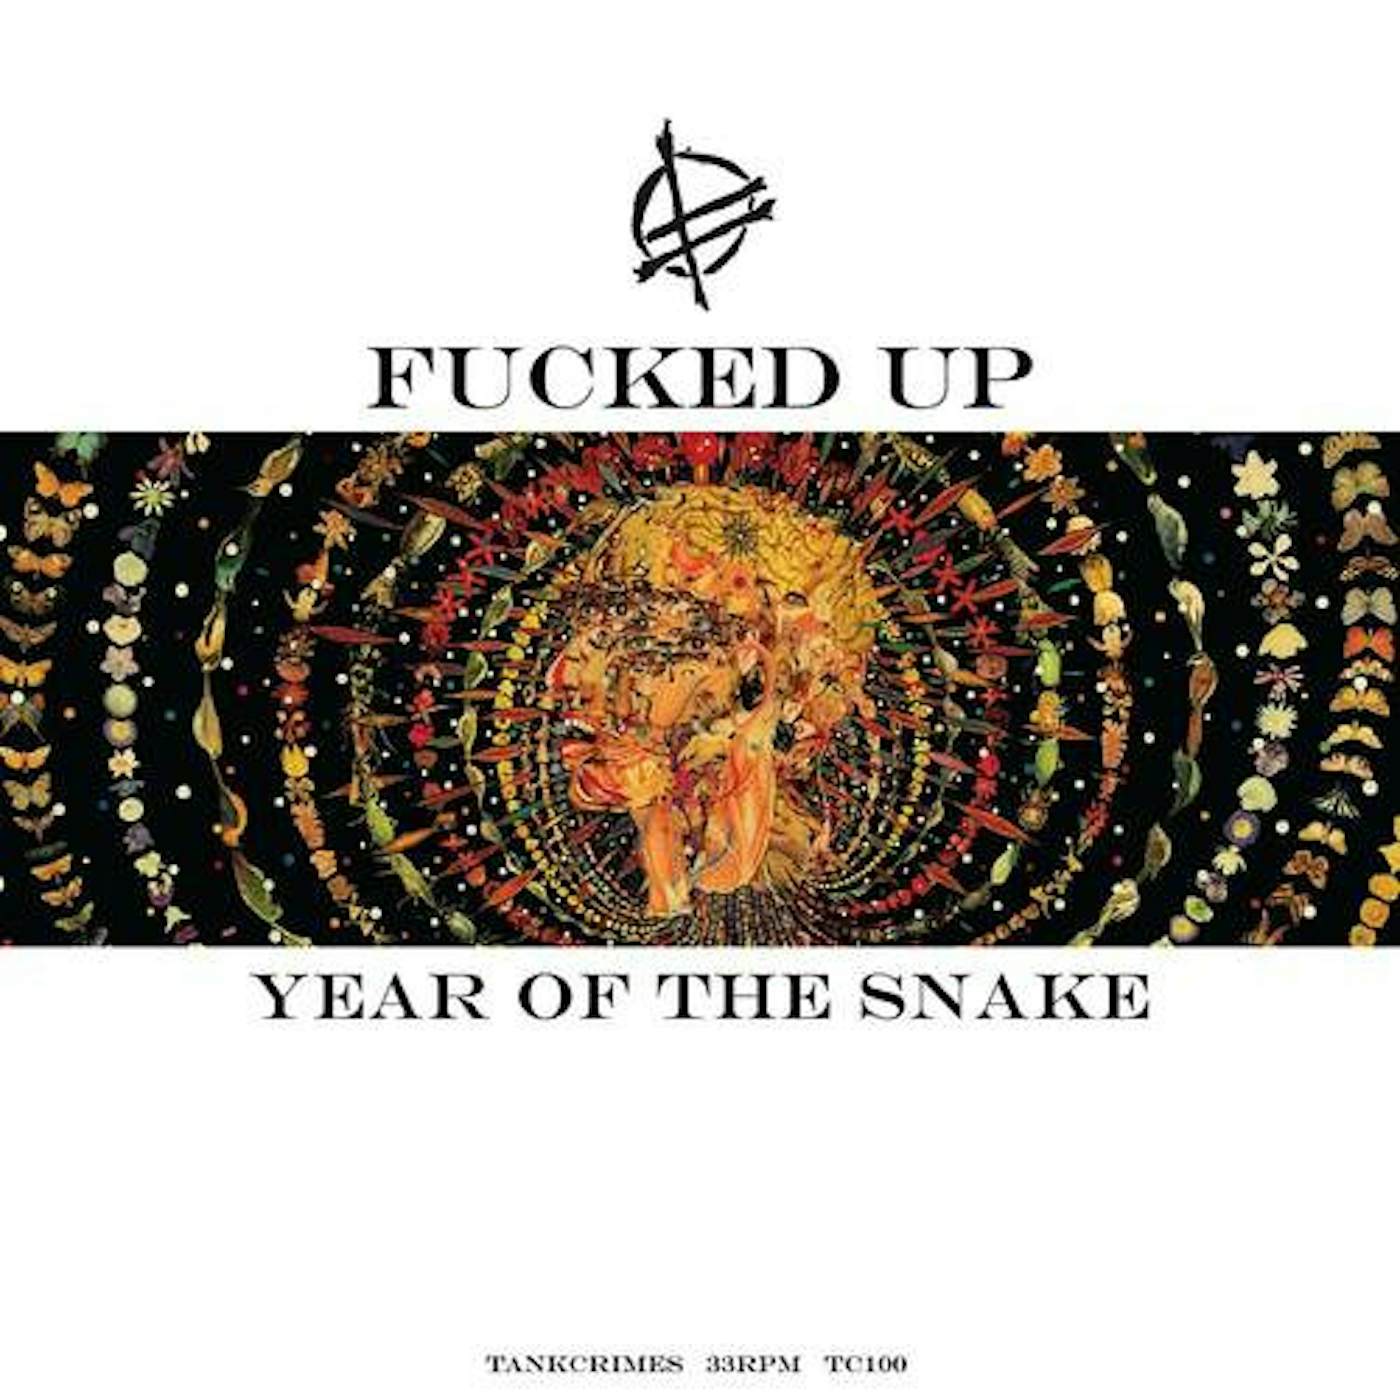 Fucked Up Year of the Snake Vinyl Record